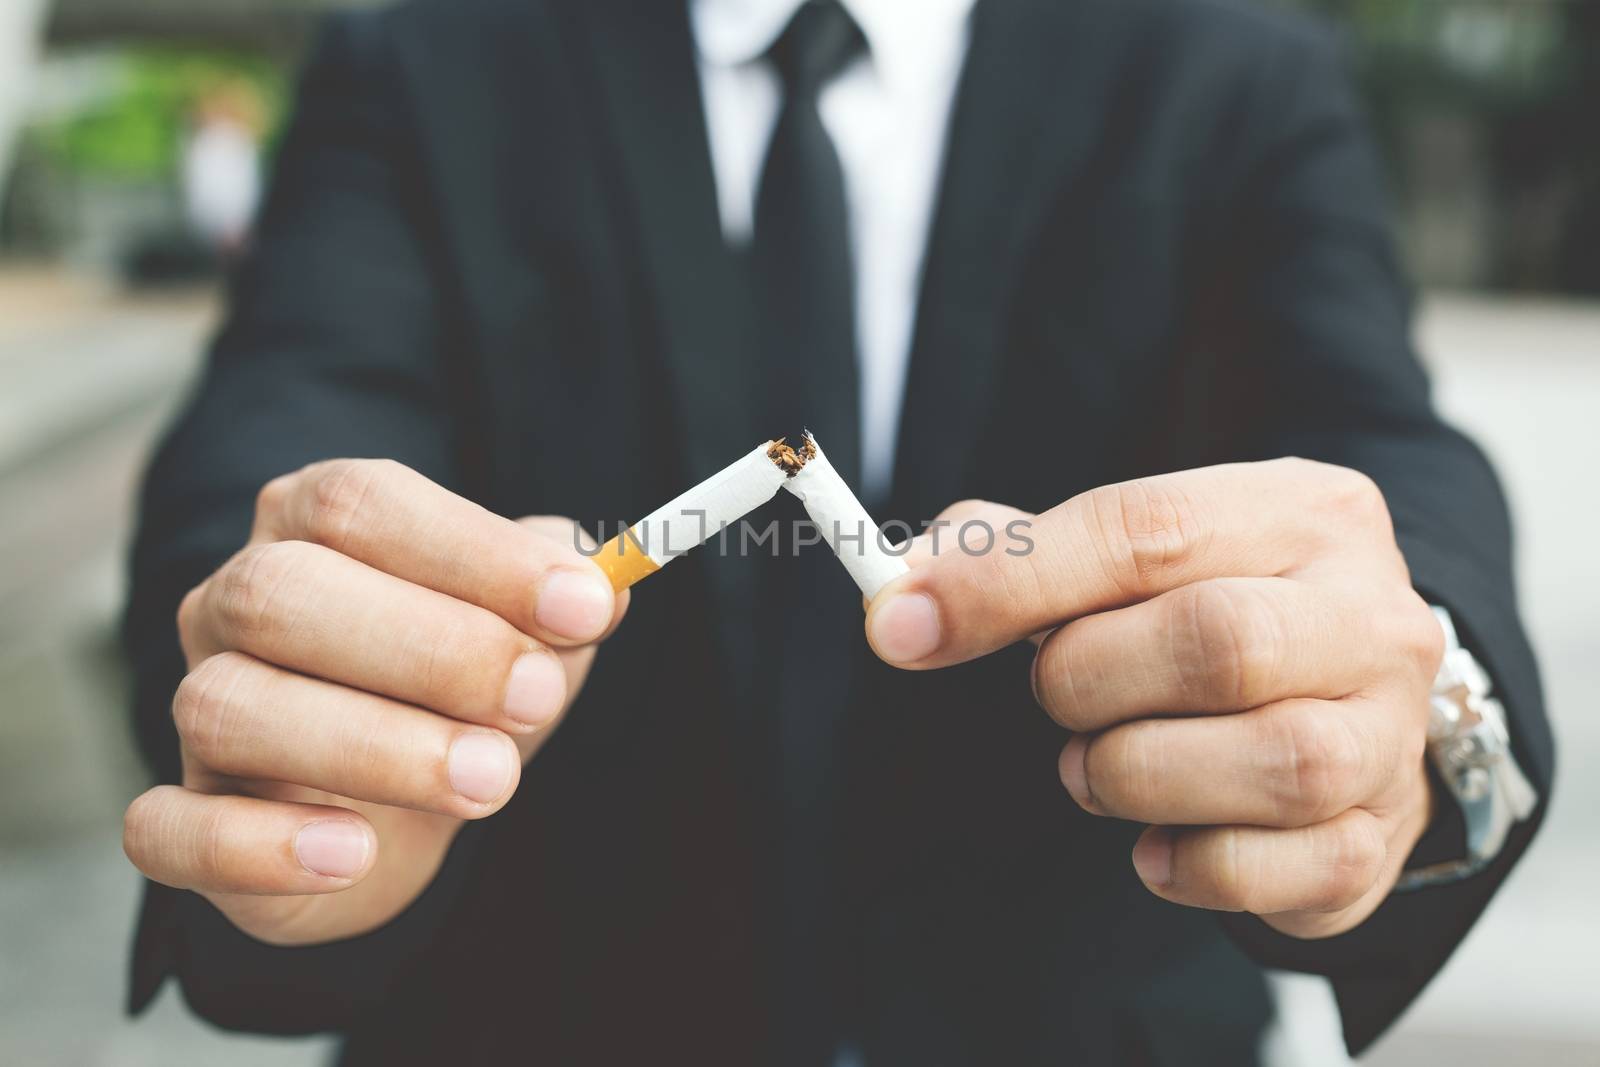 A new generation of businessman refusing cigarettes concept for quitting smoking and healthy lifestyle.or No smoking campaign Concept. by boytaro1428@gmail.com